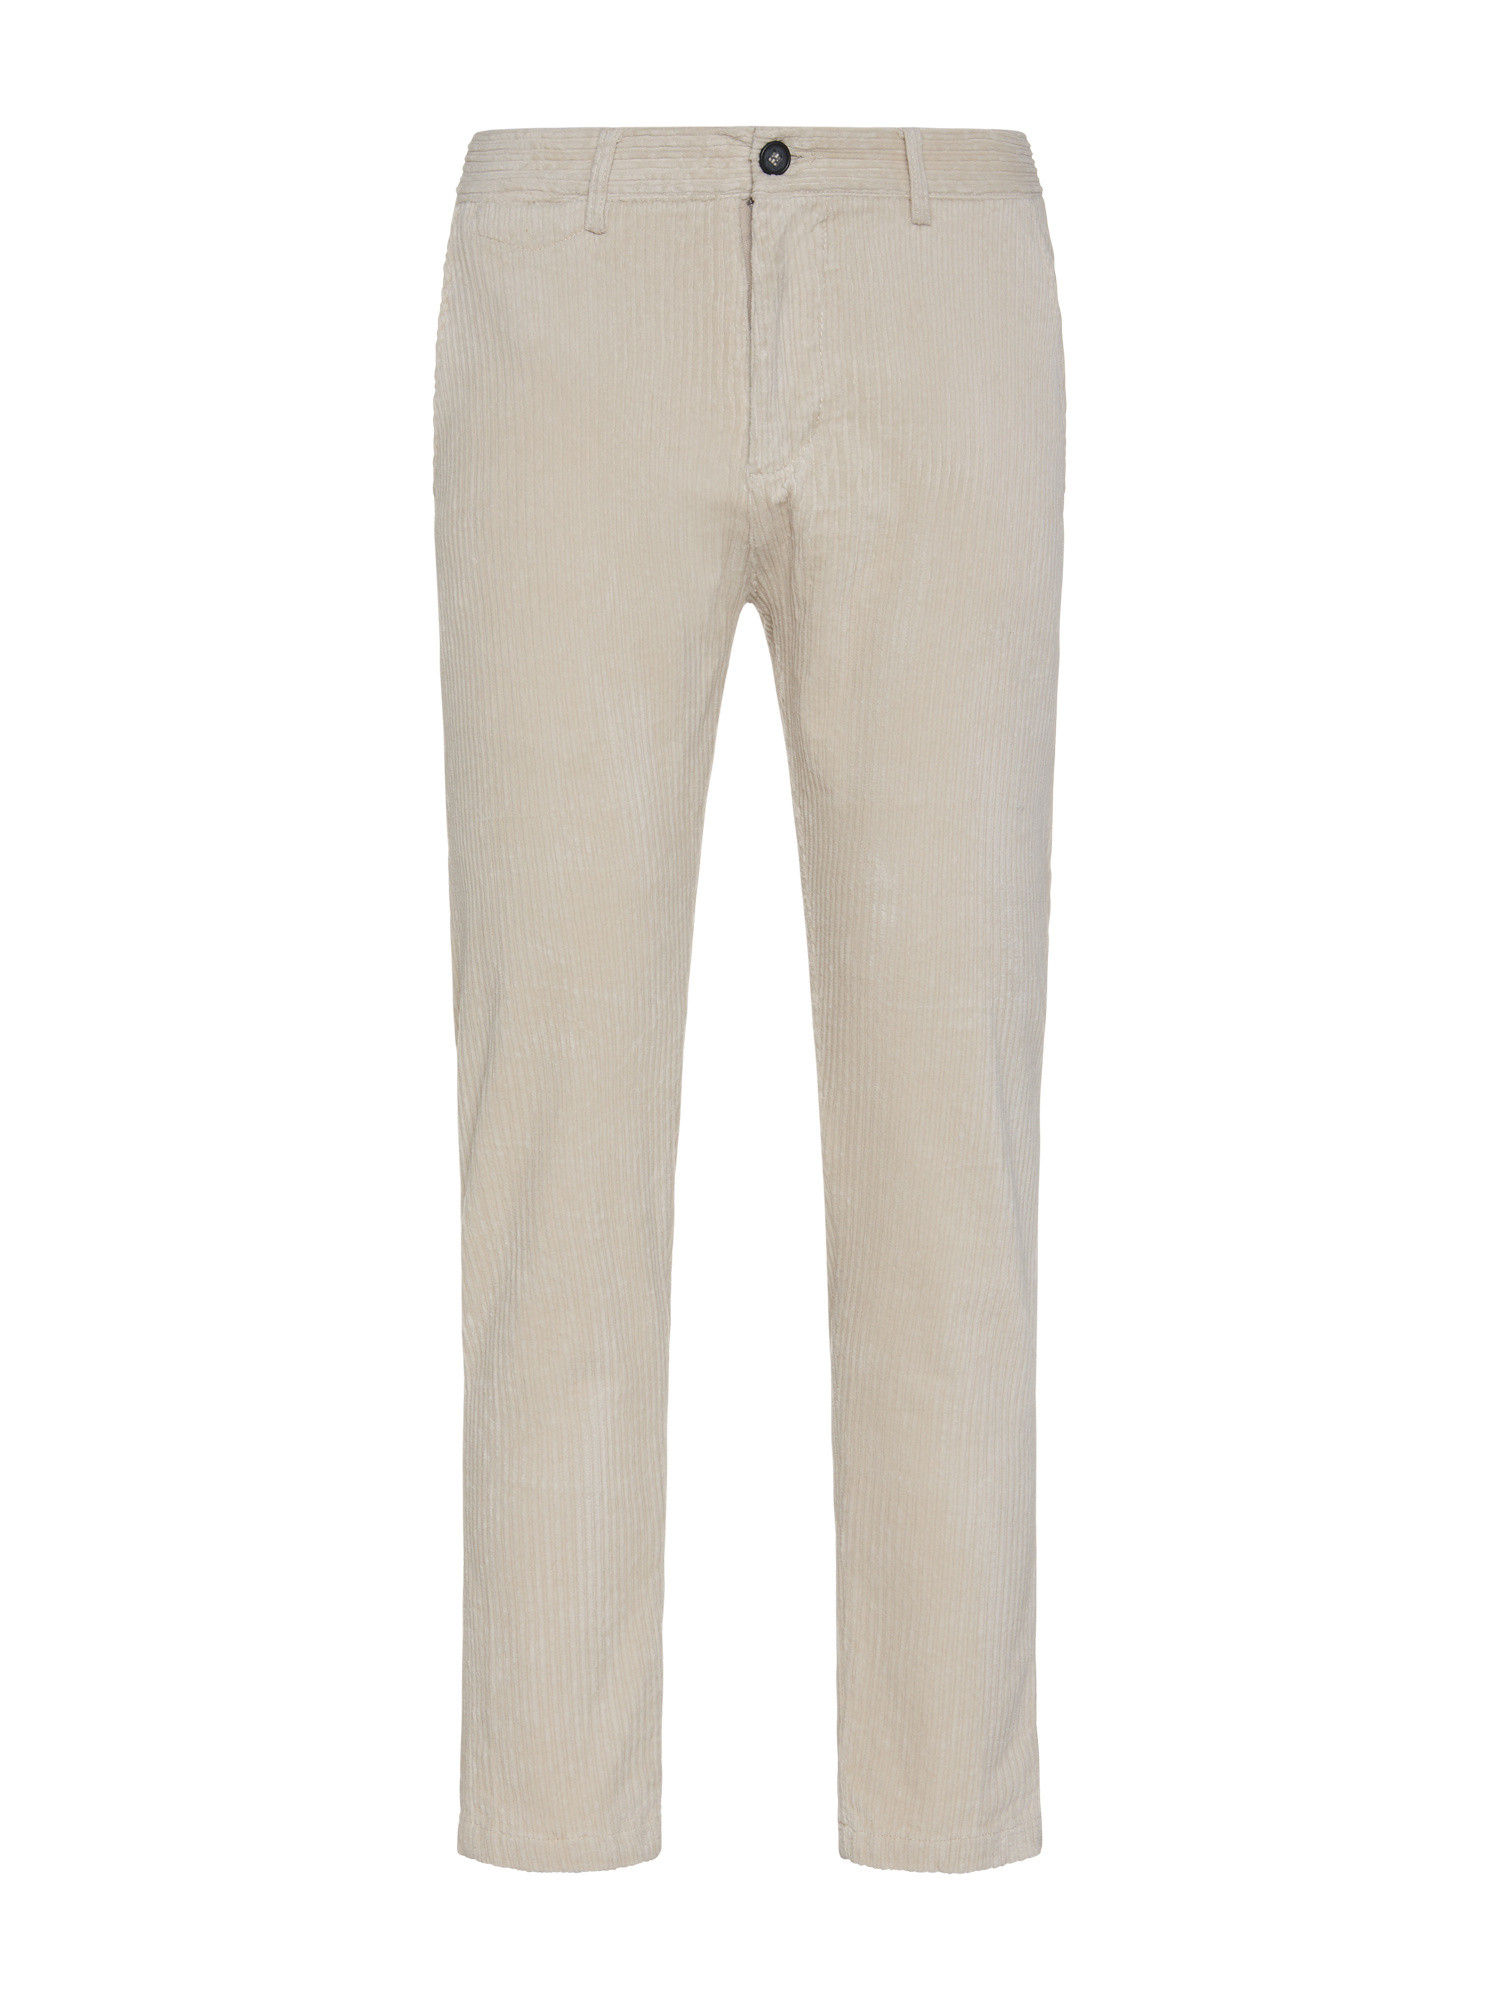 JCT - Corduroy chino trousers, White, large image number 0